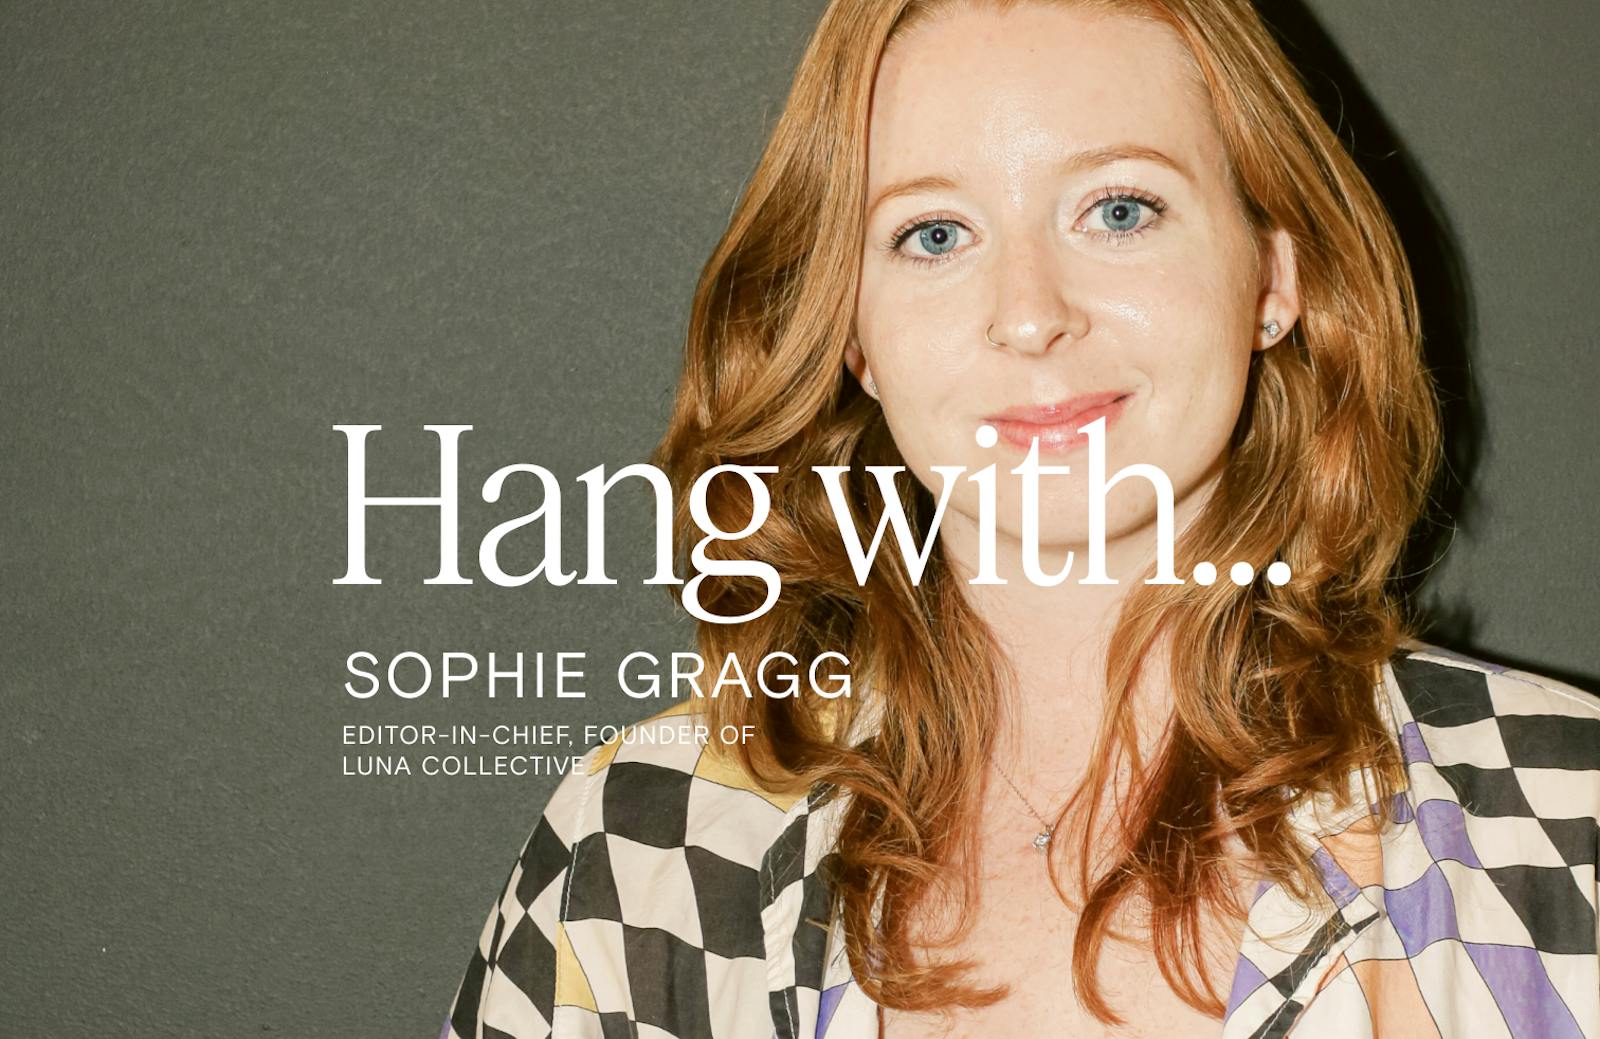 Hang with Sophie Gragg